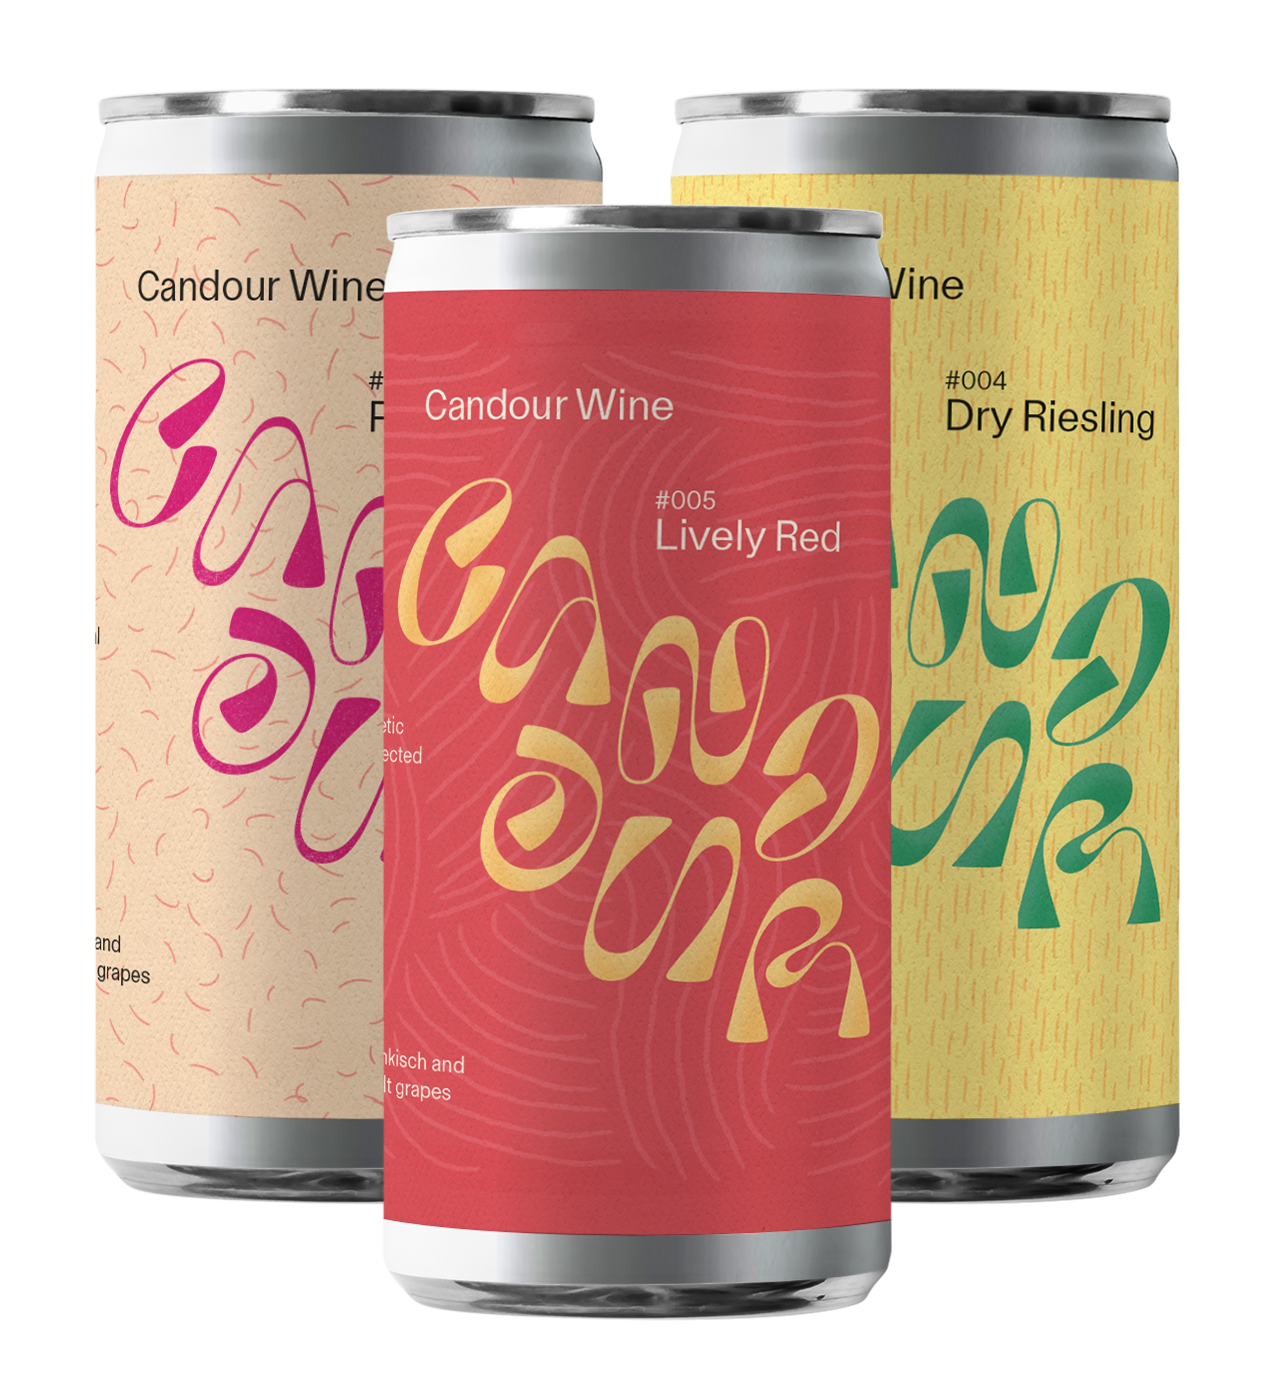 Three cans of wine: one pink, one yellow, and one red.